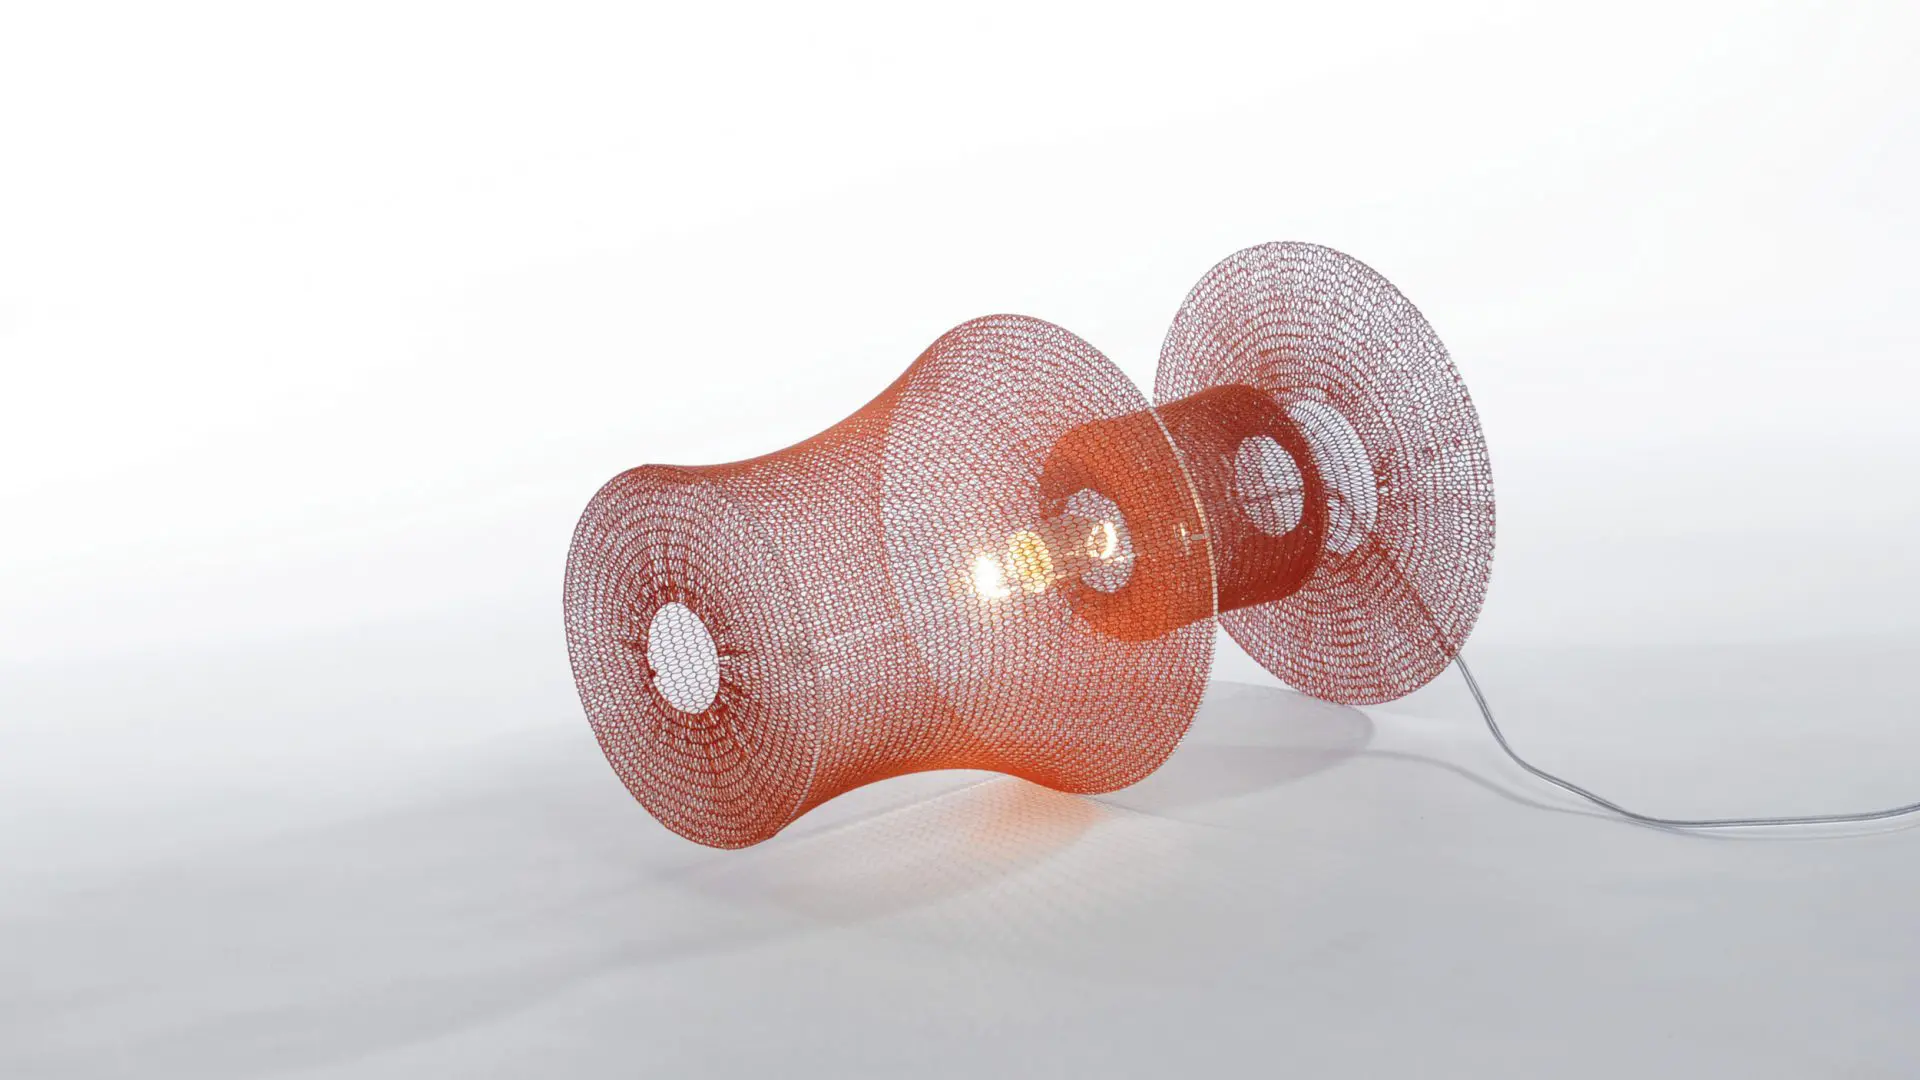 Knitted lamp by Studio Meike